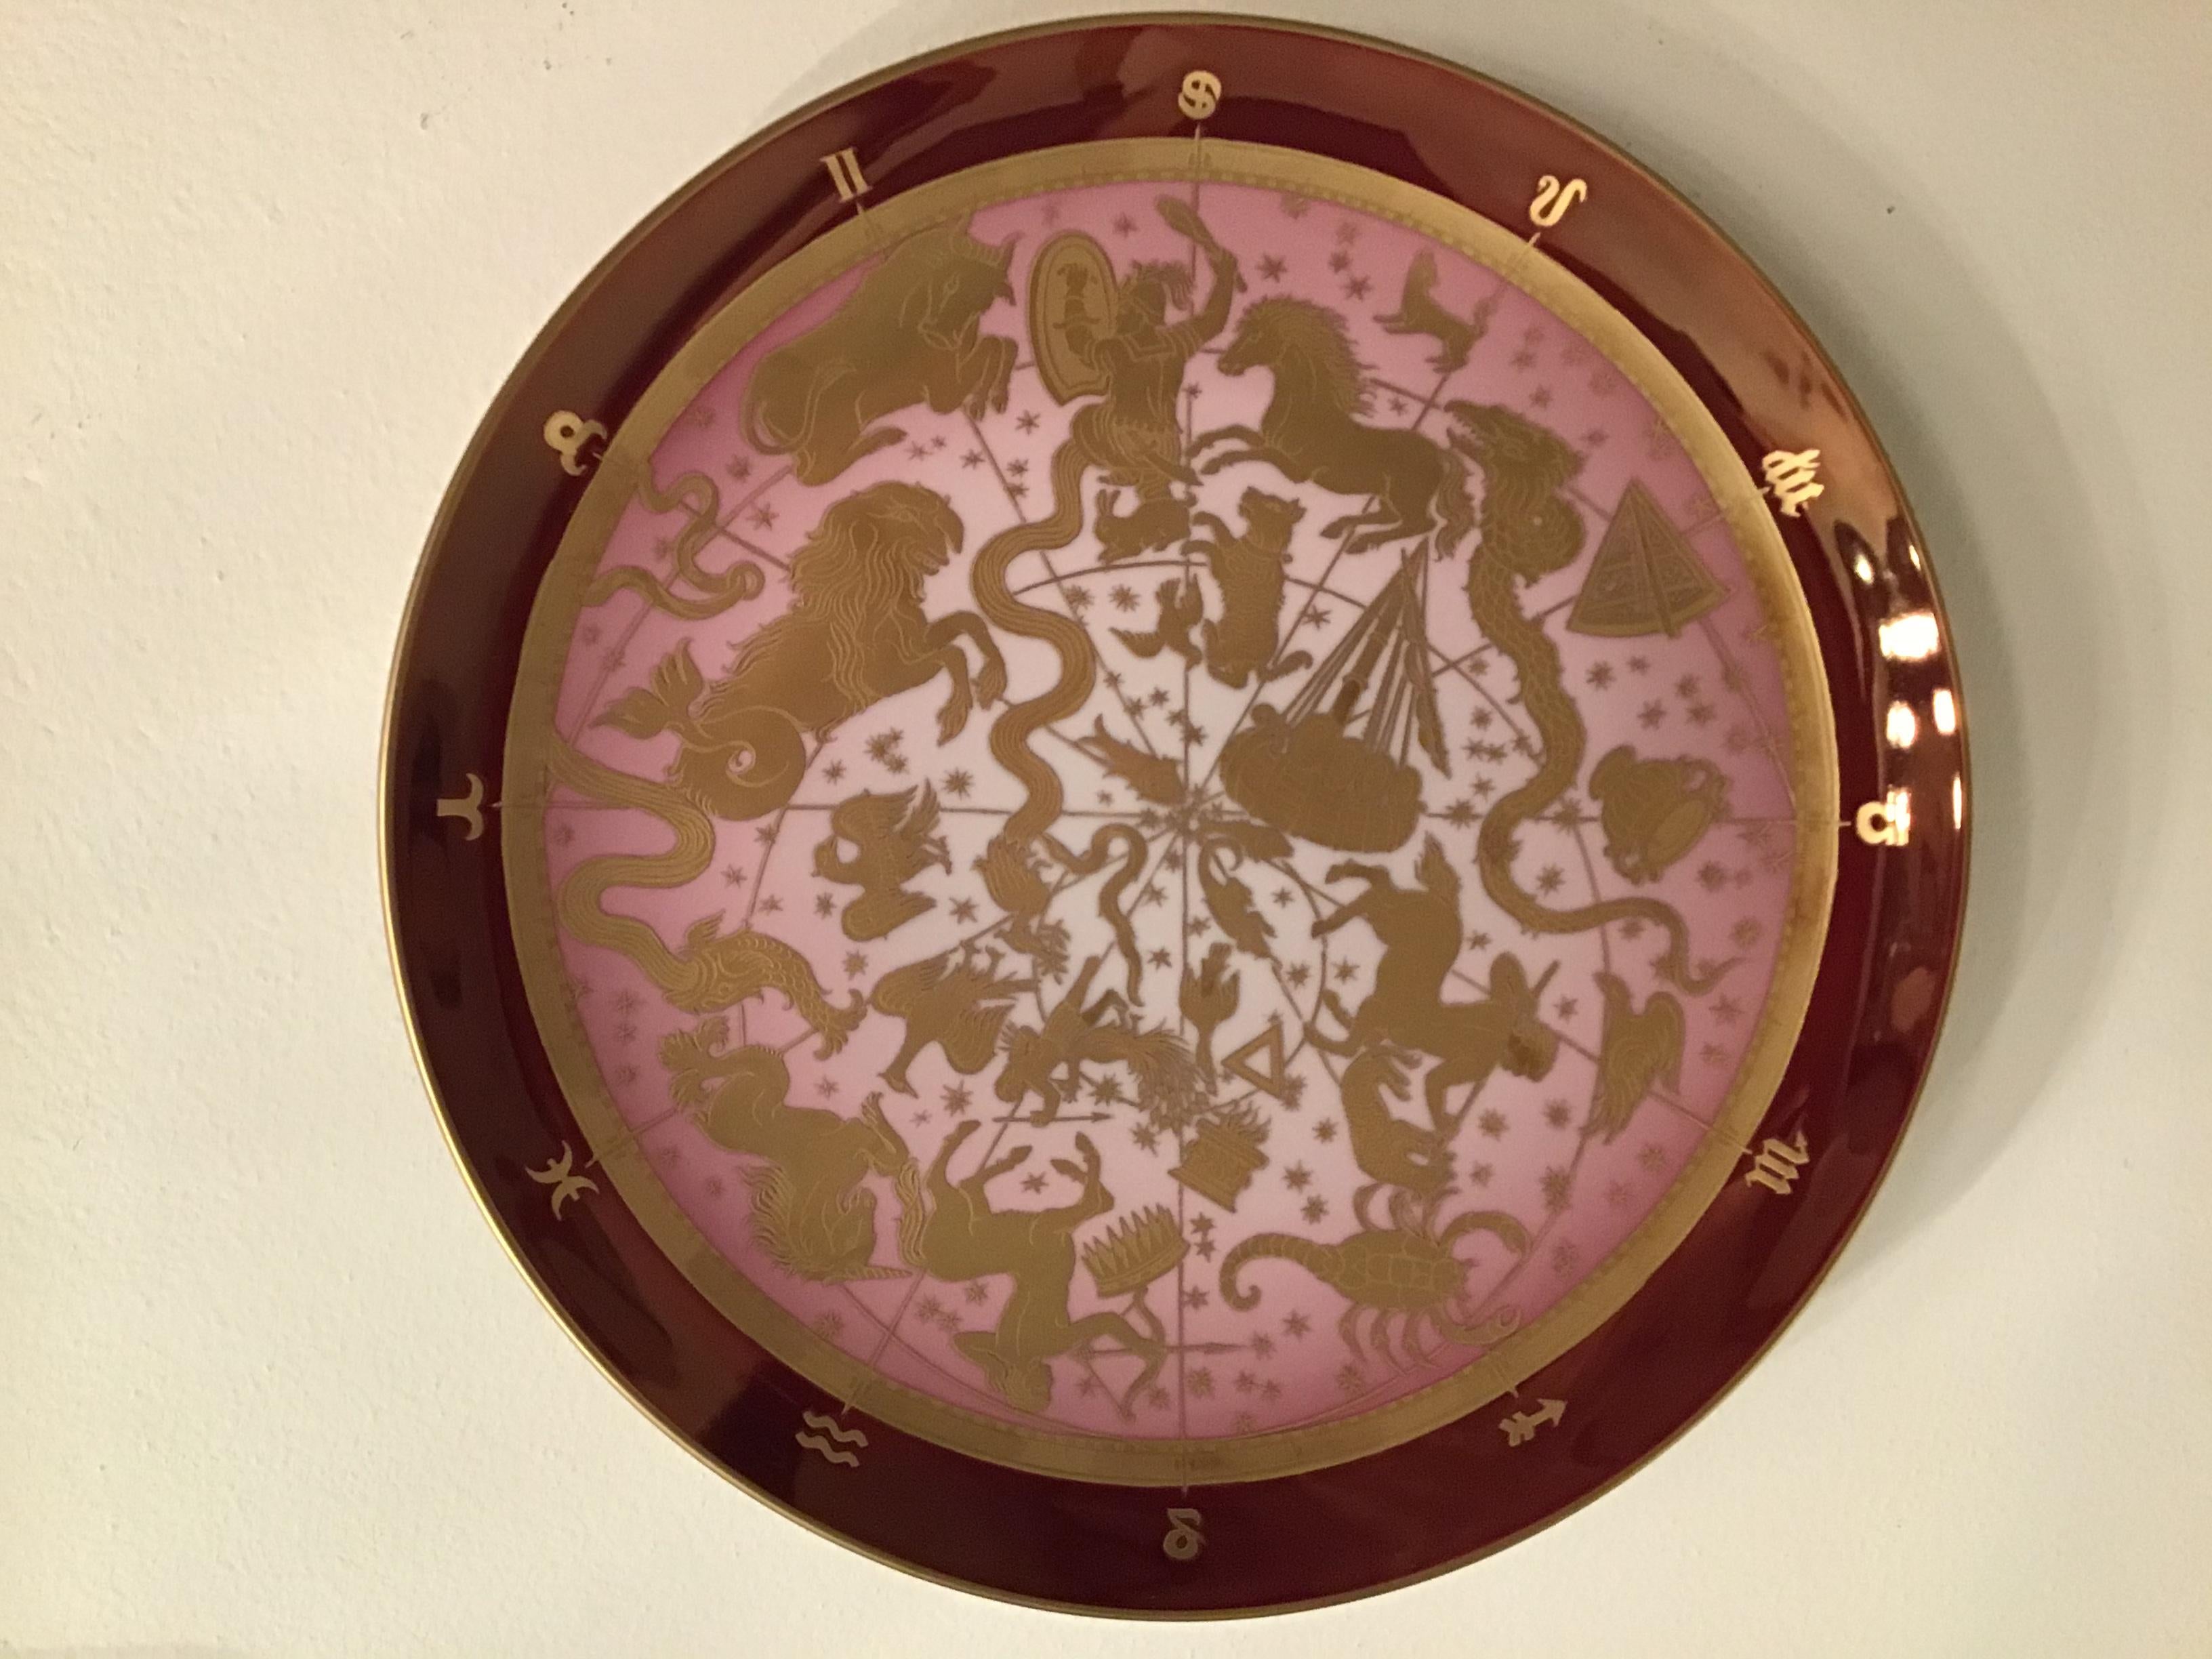 Morbelli Porcelain Wall Plate “Planisfero Celeste“ Worked with Pure Gold 1960 IT For Sale 7